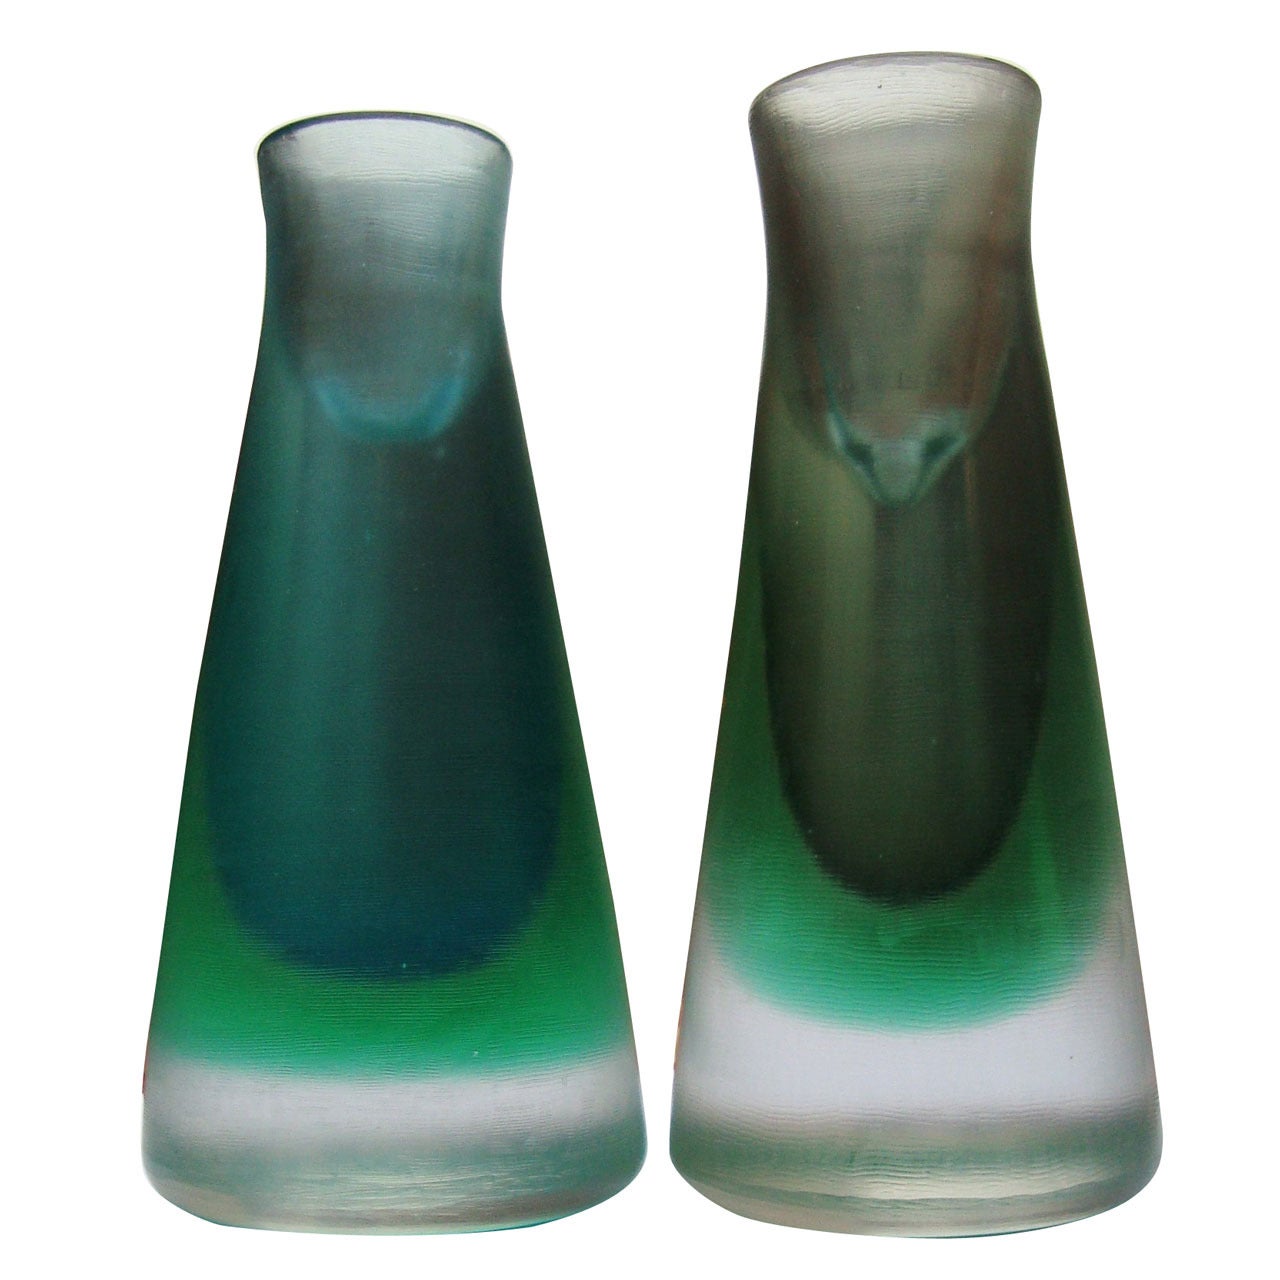 Rare Pair of 1950s Venini Murano Glass Candleholders For Sale